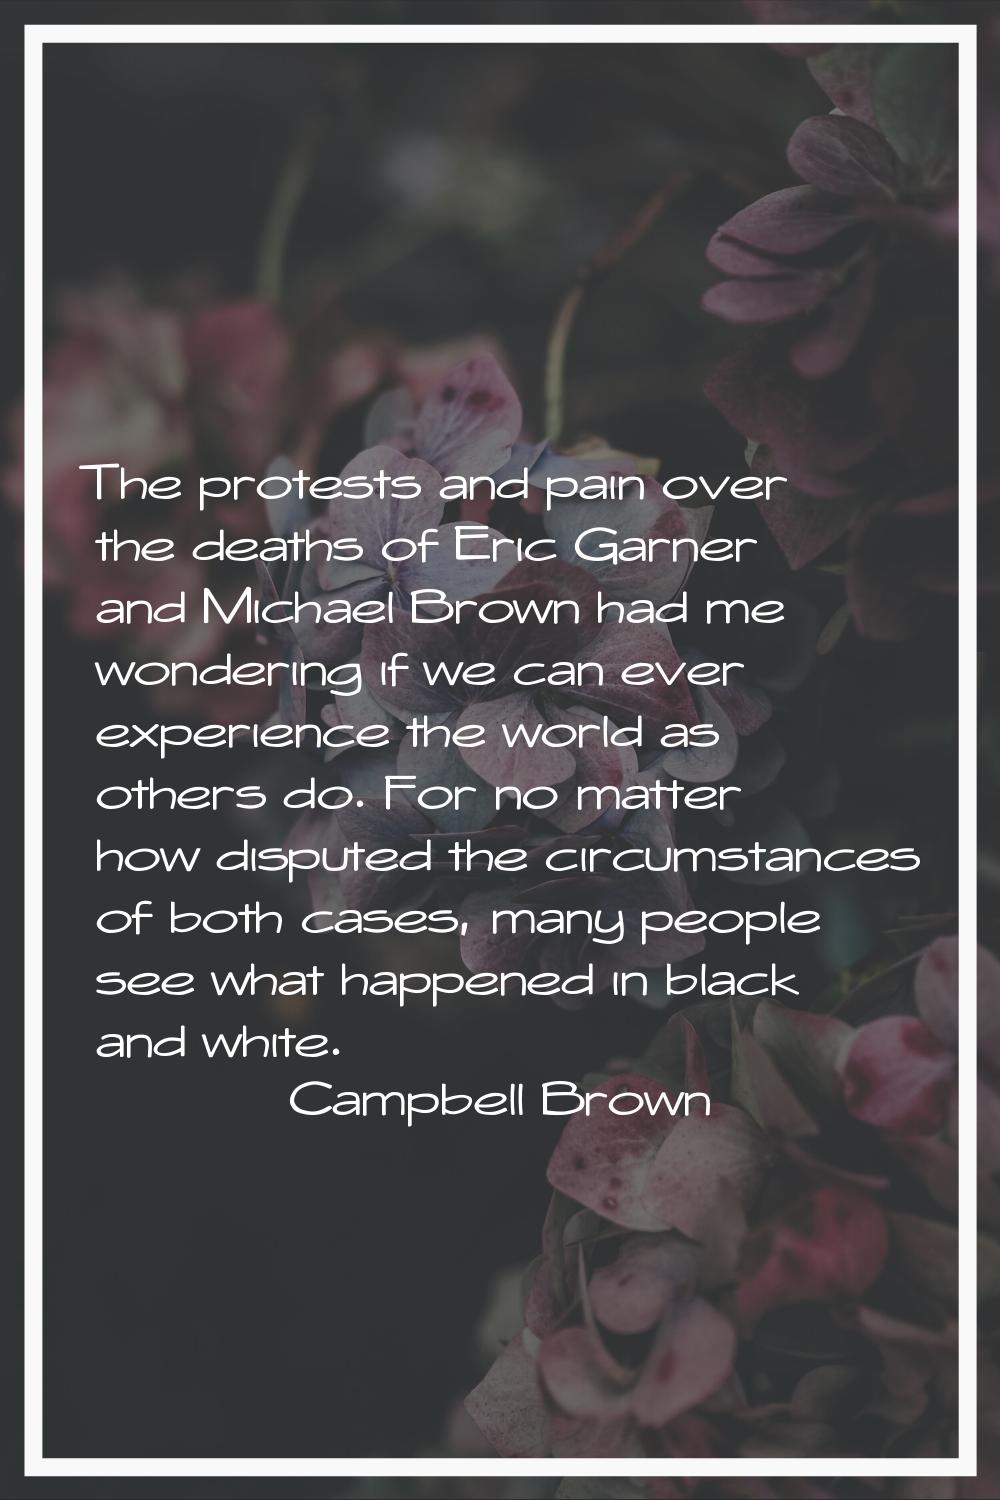 The protests and pain over the deaths of Eric Garner and Michael Brown had me wondering if we can e